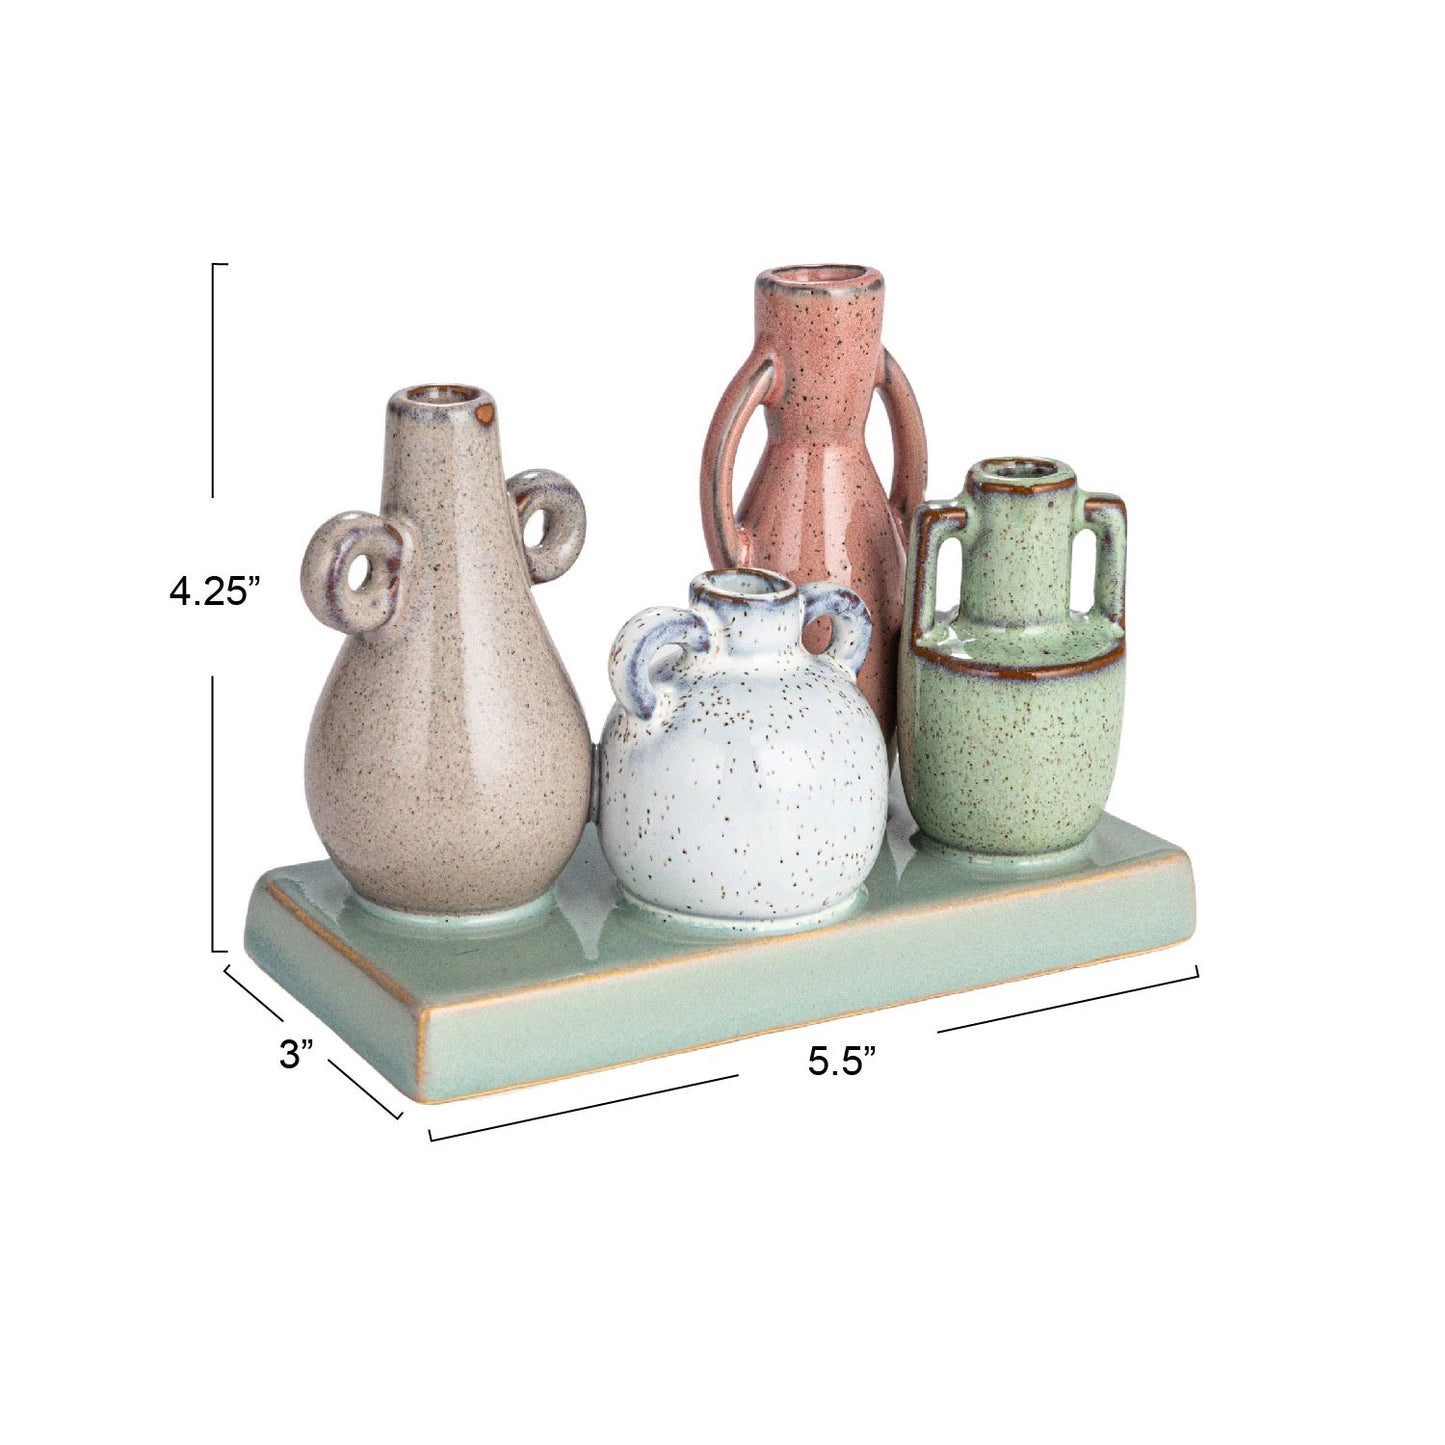 Vases on Base with measurments.